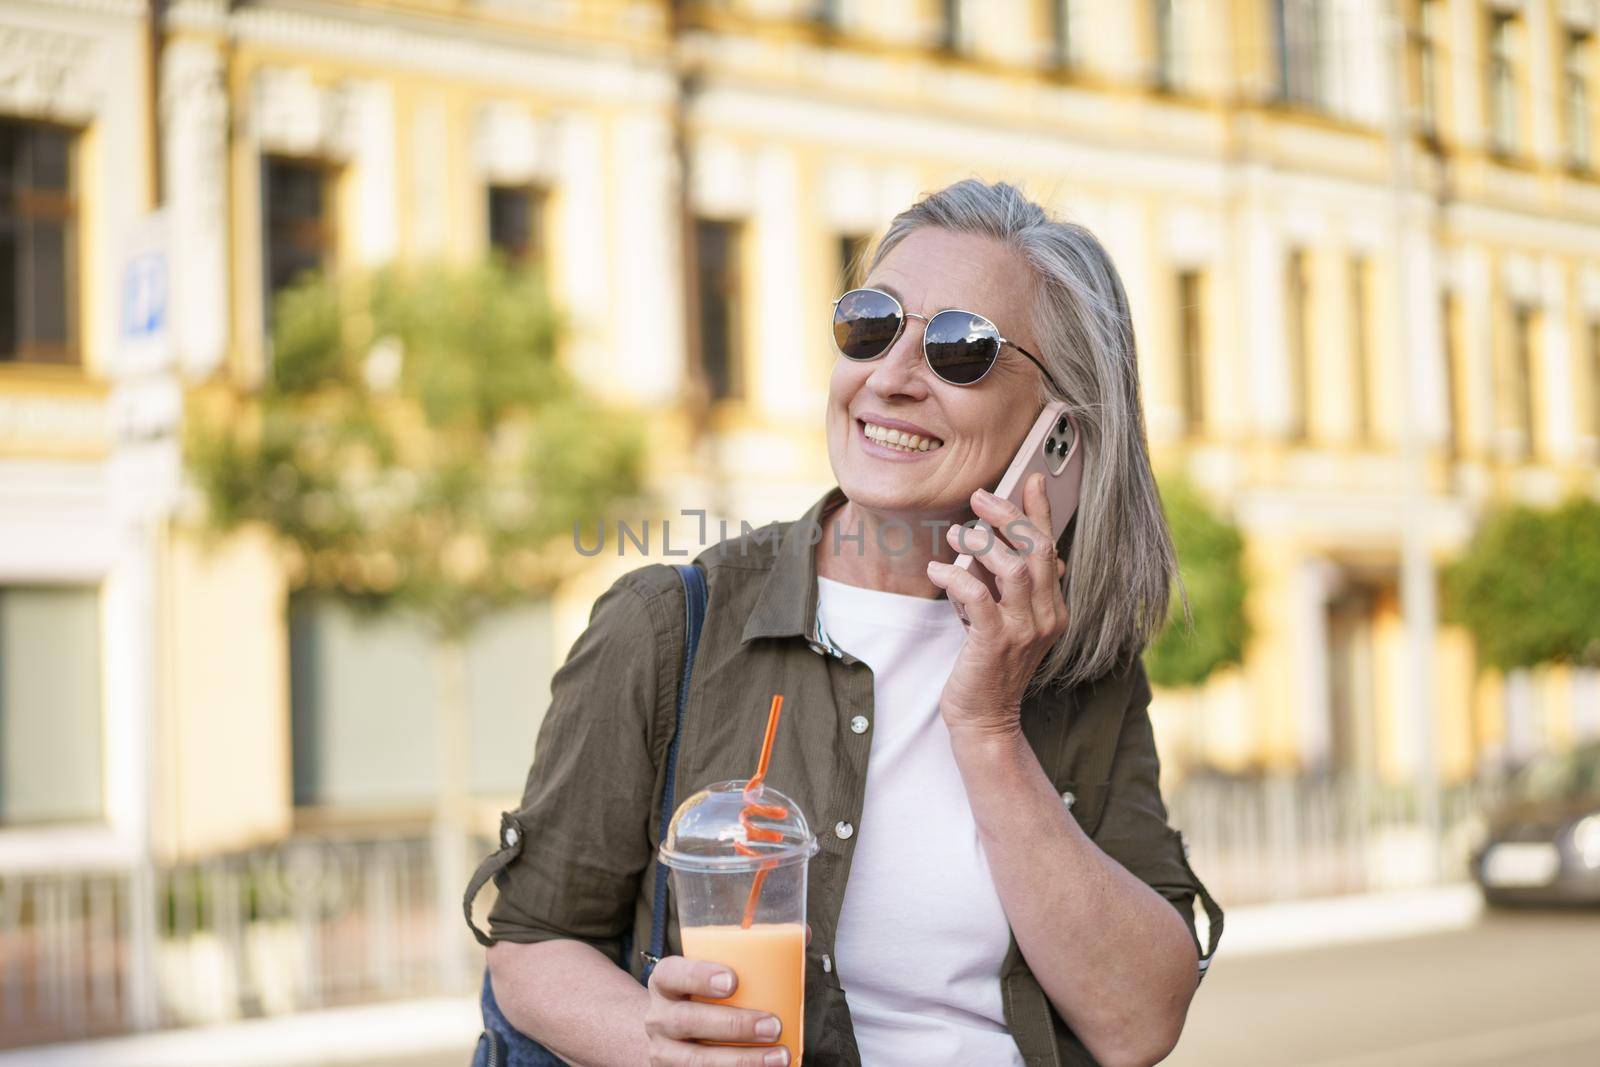 Answering phone call happy mature woman talking on the phone enjoying free time after work or traveling having juice in plastic cup on the go in city background. Enjoying life mature woman by LipikStockMedia